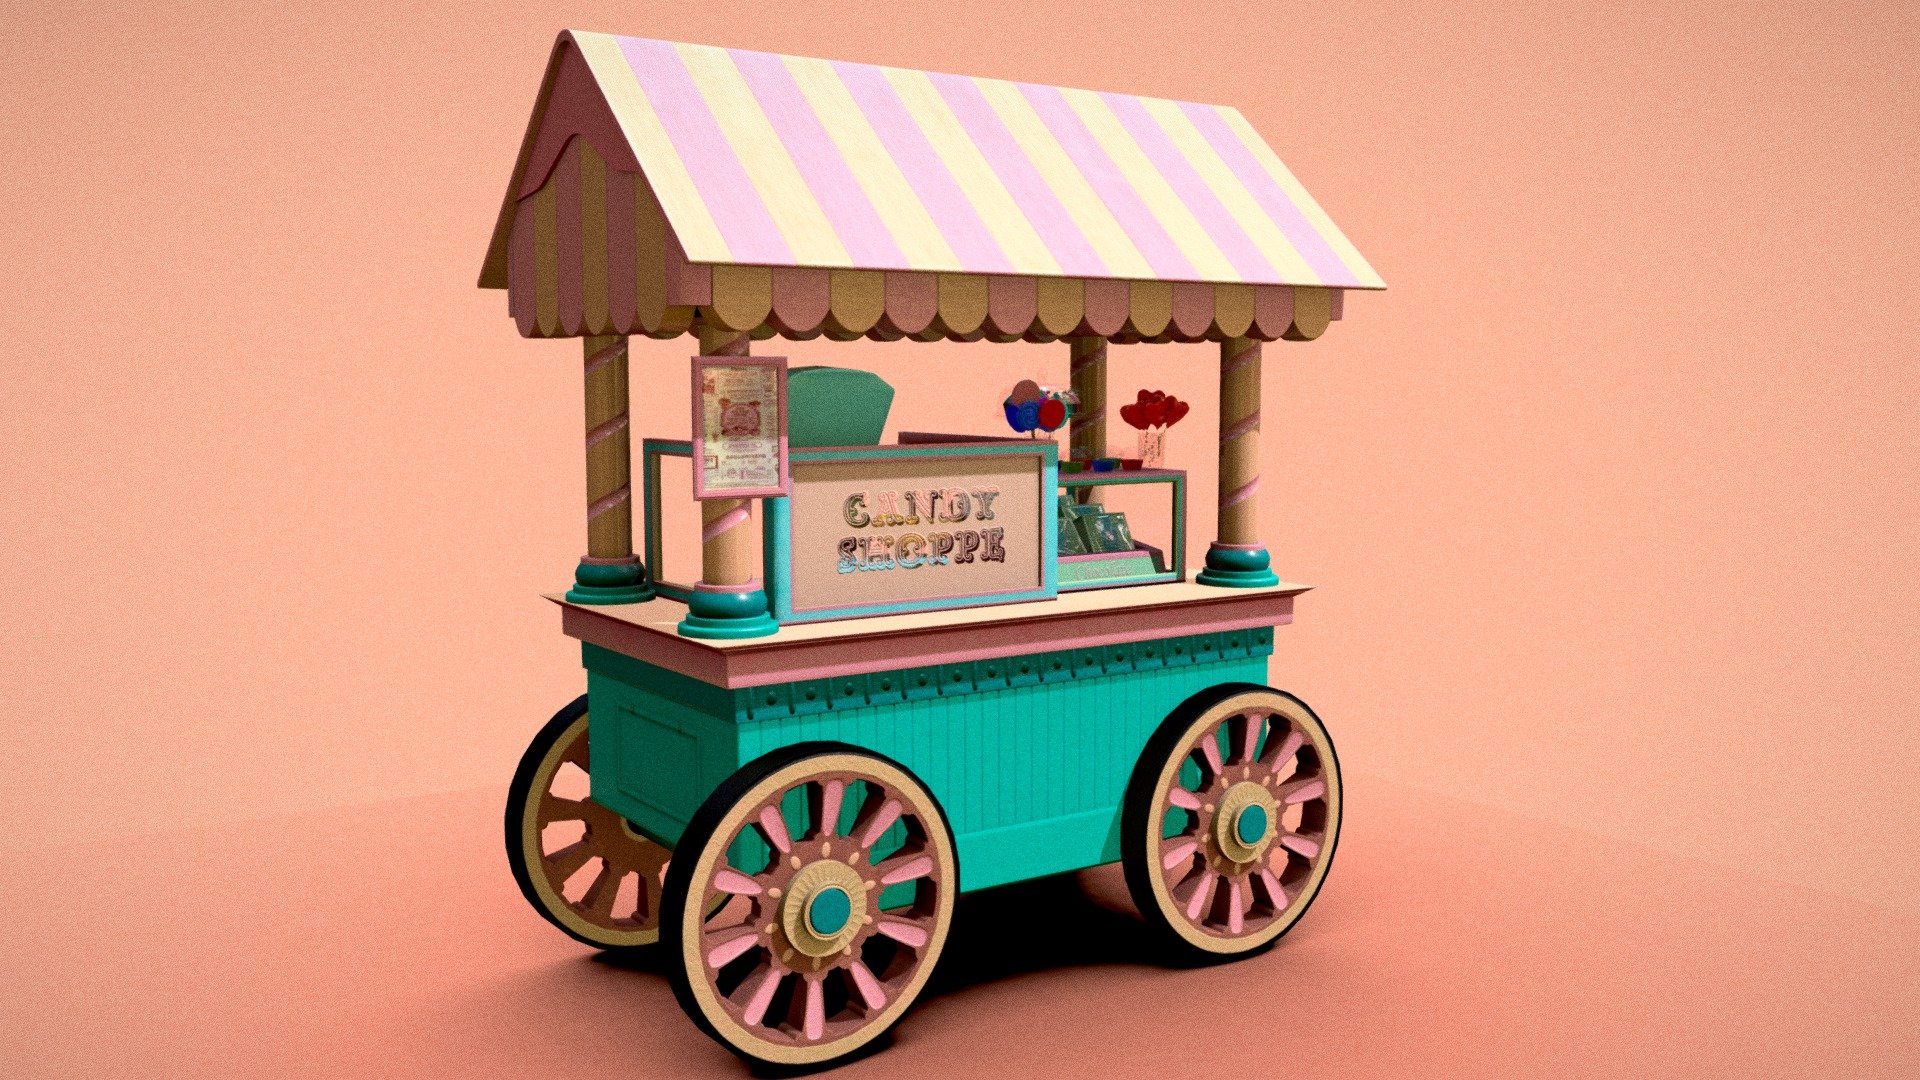 Low poly candy cart from fairs with sweets and chocolates - Candy Shoppe - 3D model by pan.stasian (@pan_stasian) 3d model